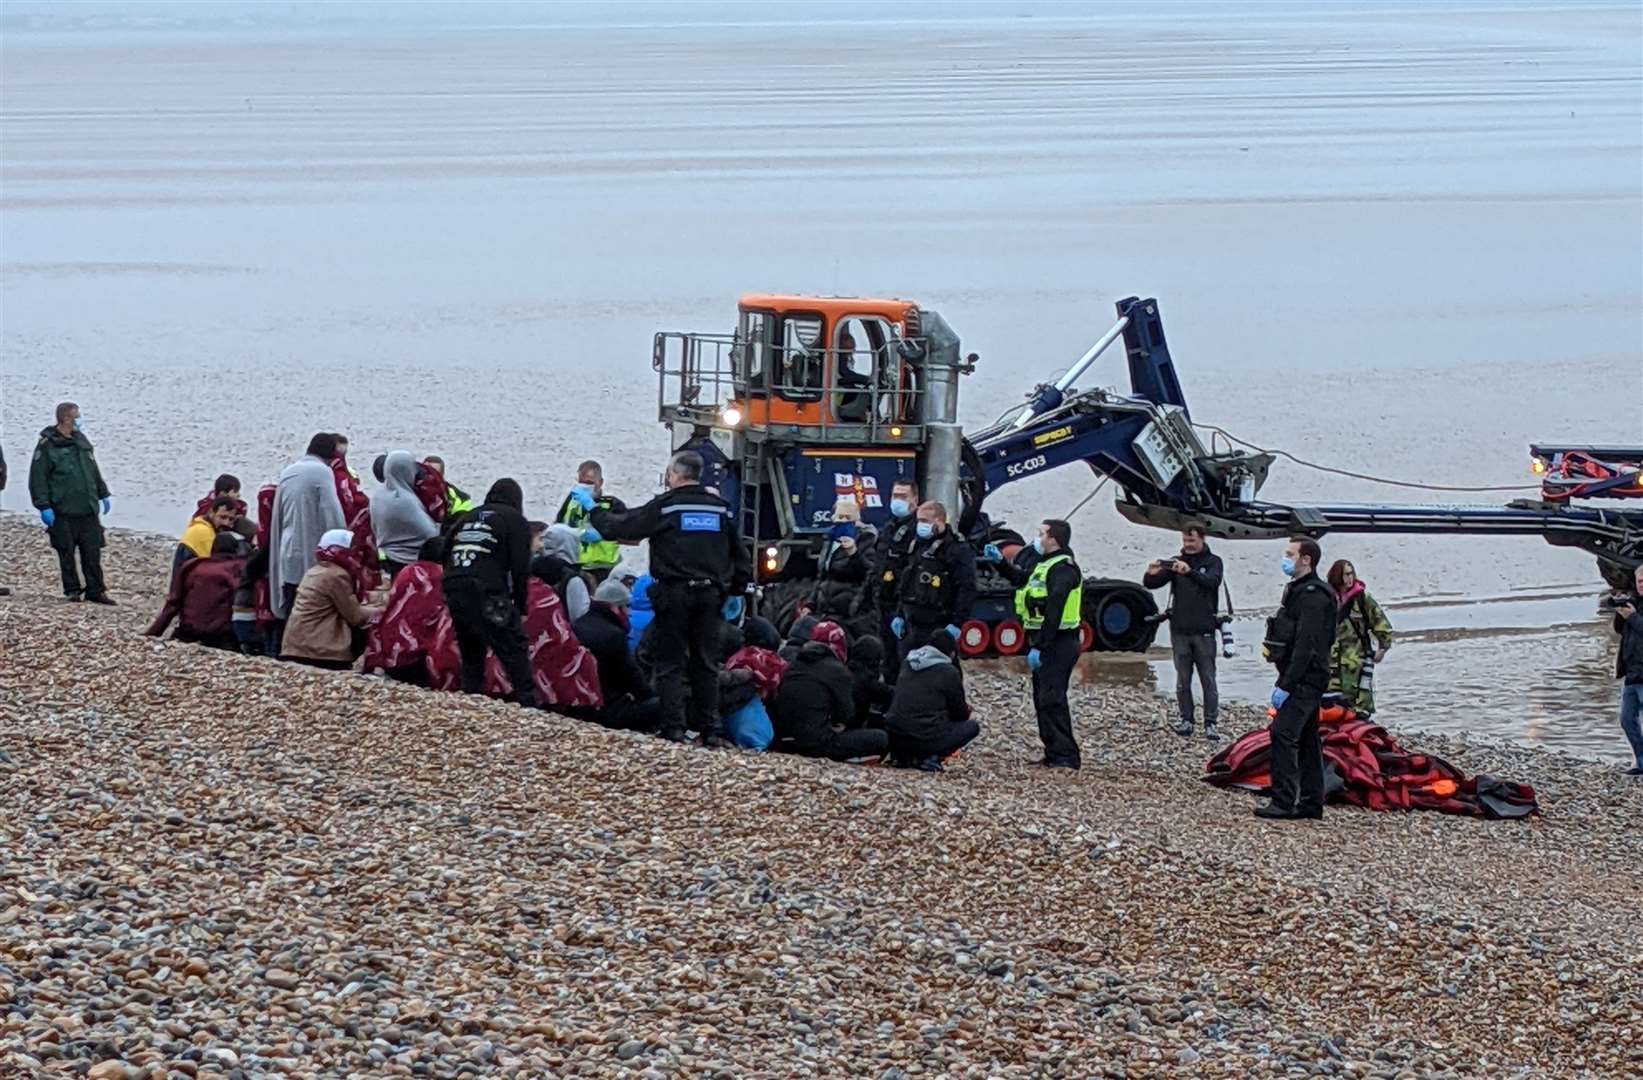 Asylum seekers arriving at Dungeness and were assisted by the RNLI. Picture: Paul Fenney